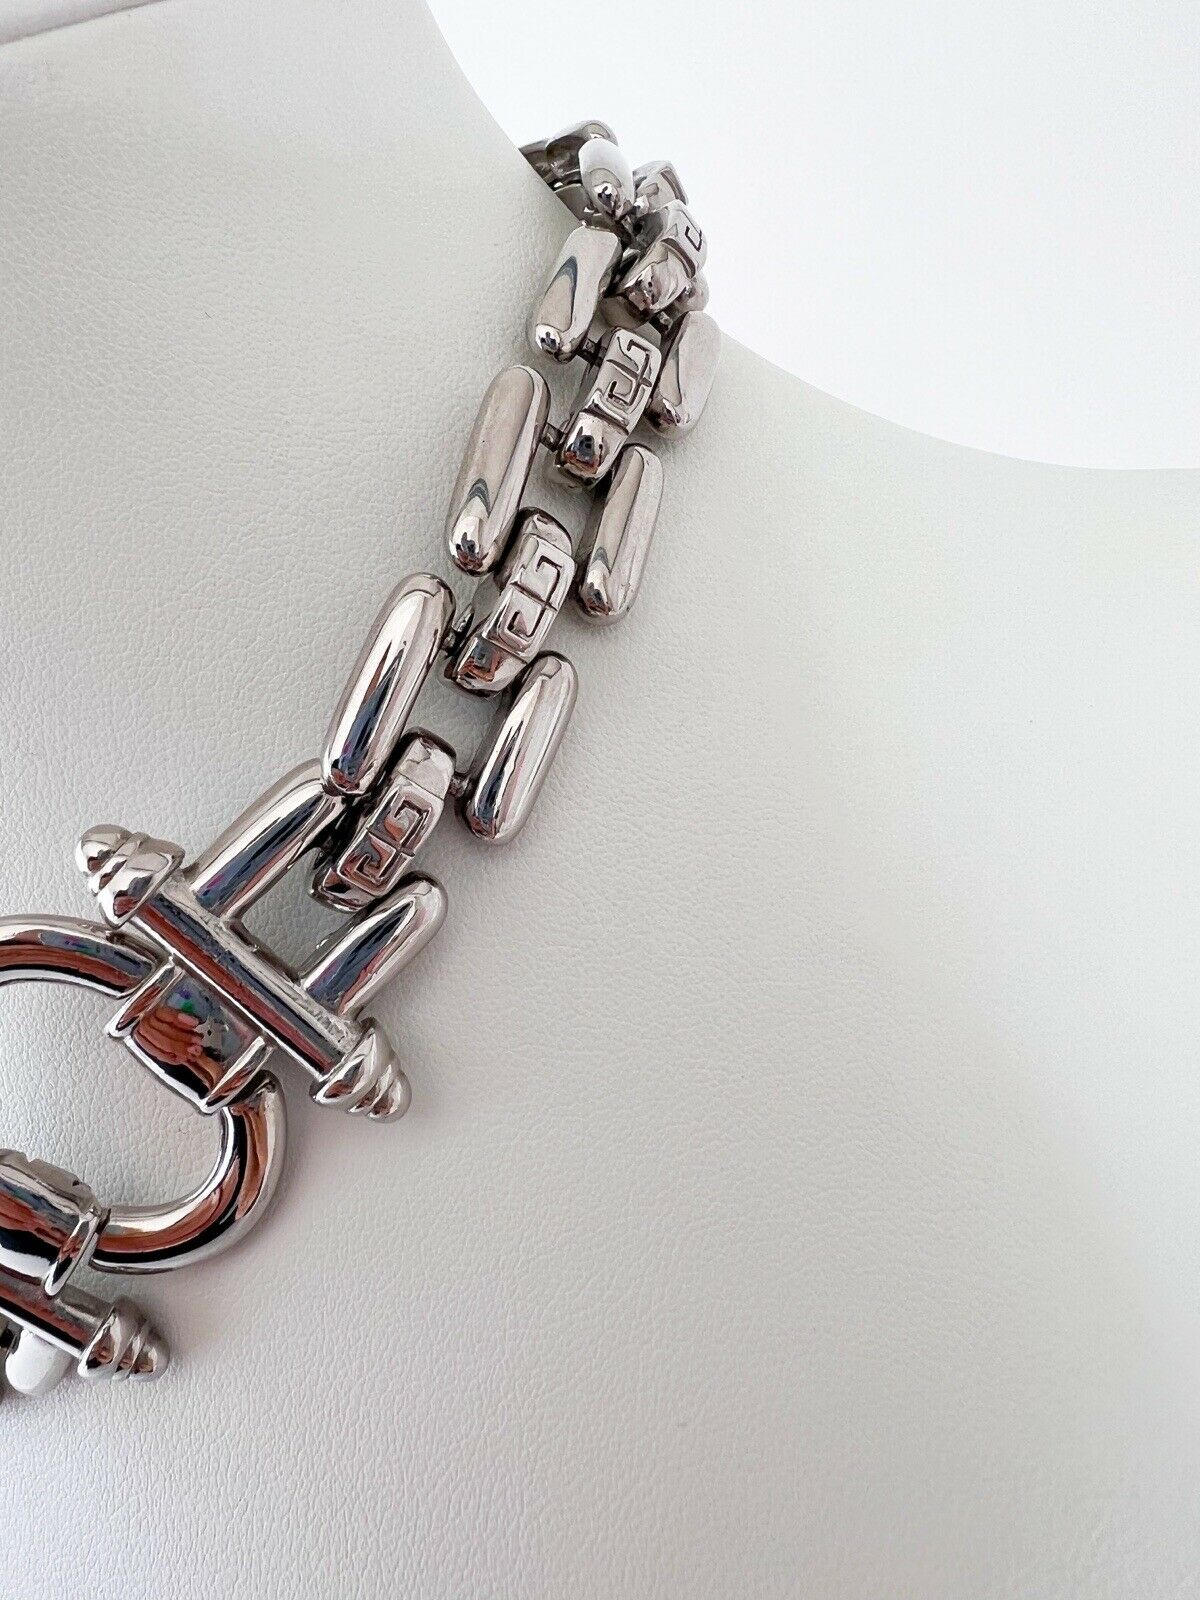 【SOLD OUT】Givenchy Vintage Silver Tone Chain Choker Necklace Iconic Logo